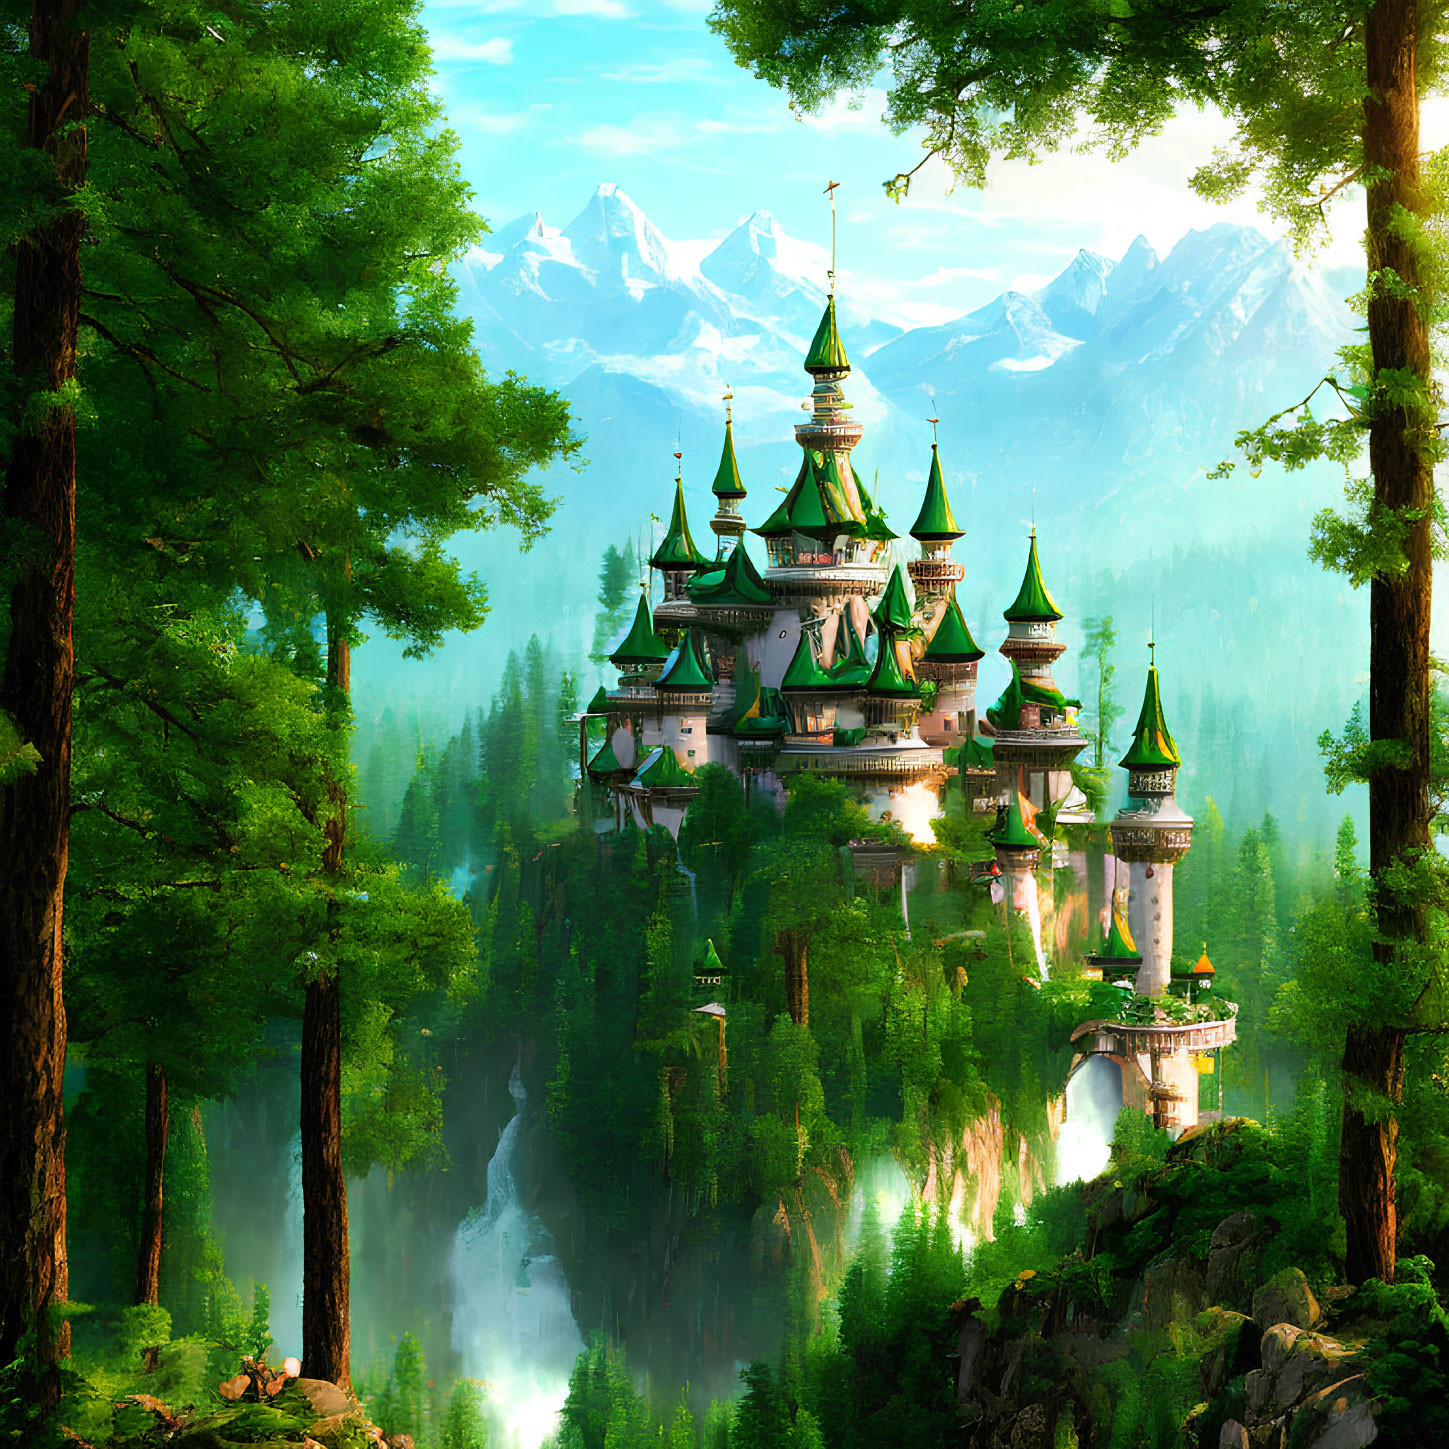 Green-roofed castle on cliff in forest with mountains and waterfall